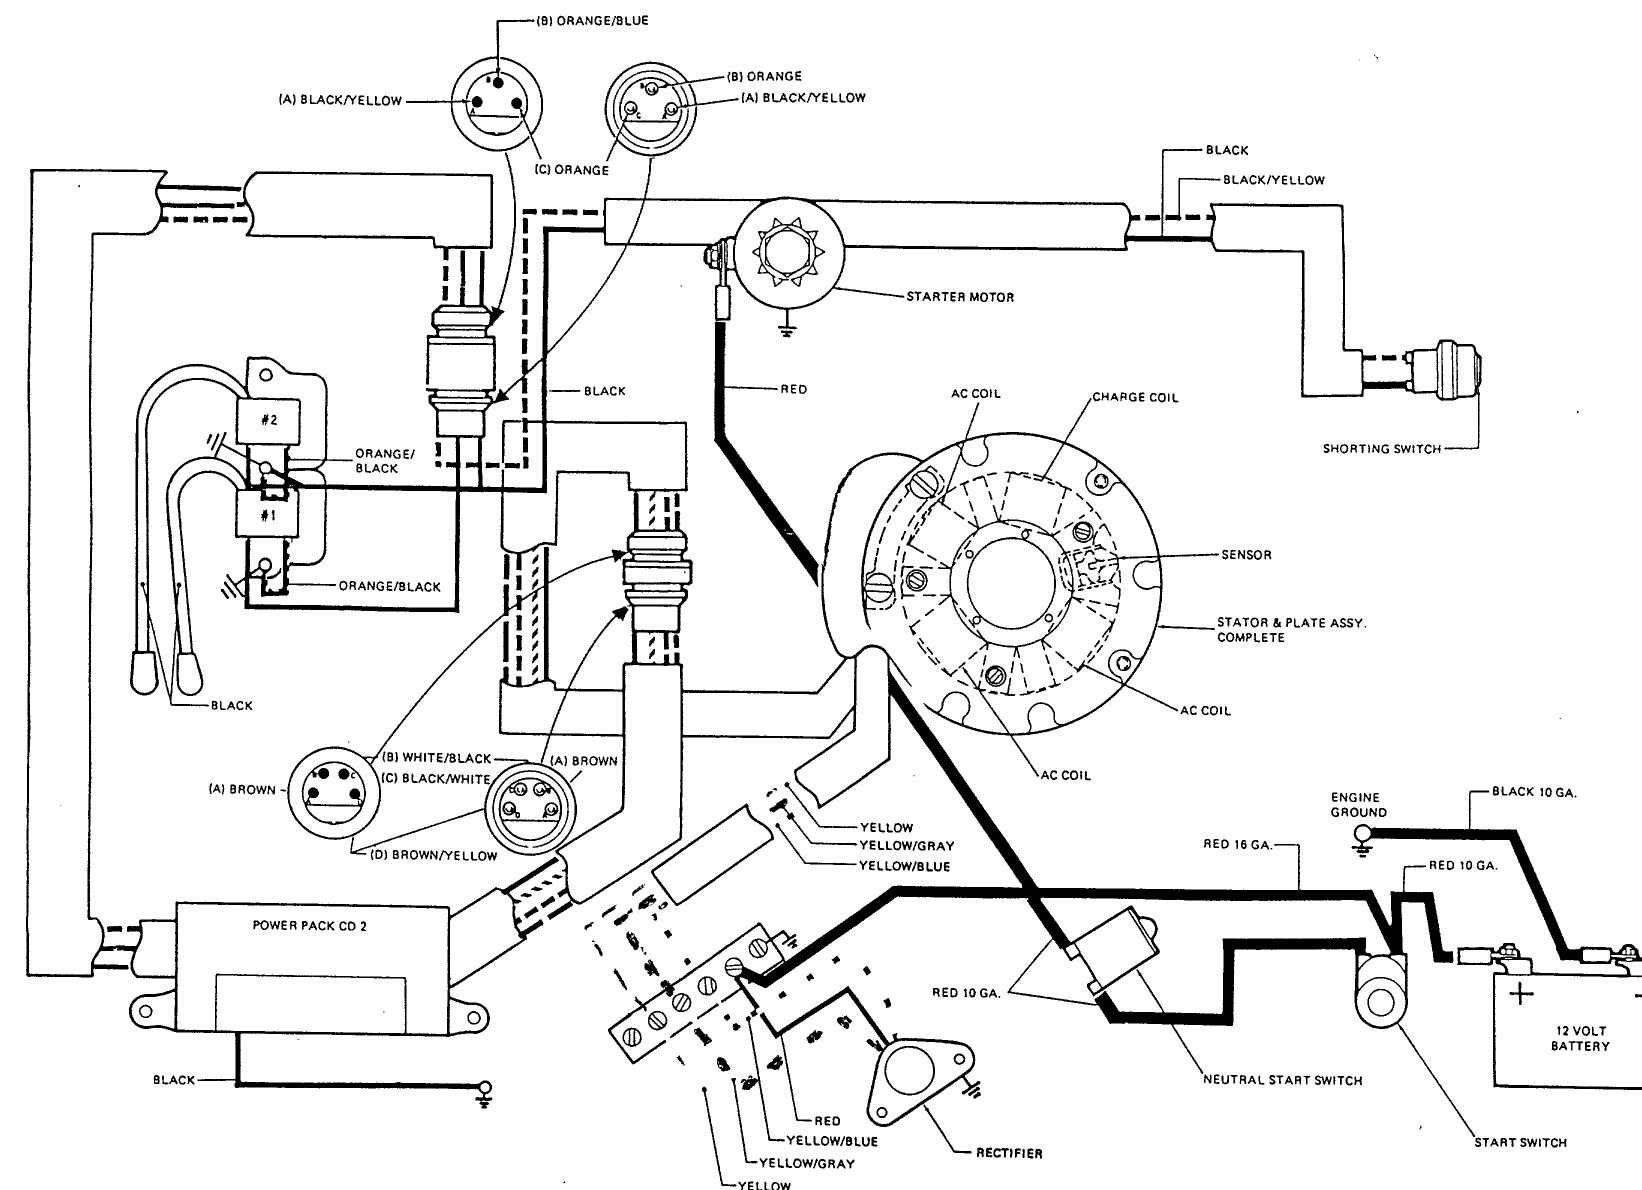 Maintaining Johnson 9.9 Troubleshooting - Yamaha Outboard Ignition Switch Wiring Diagram